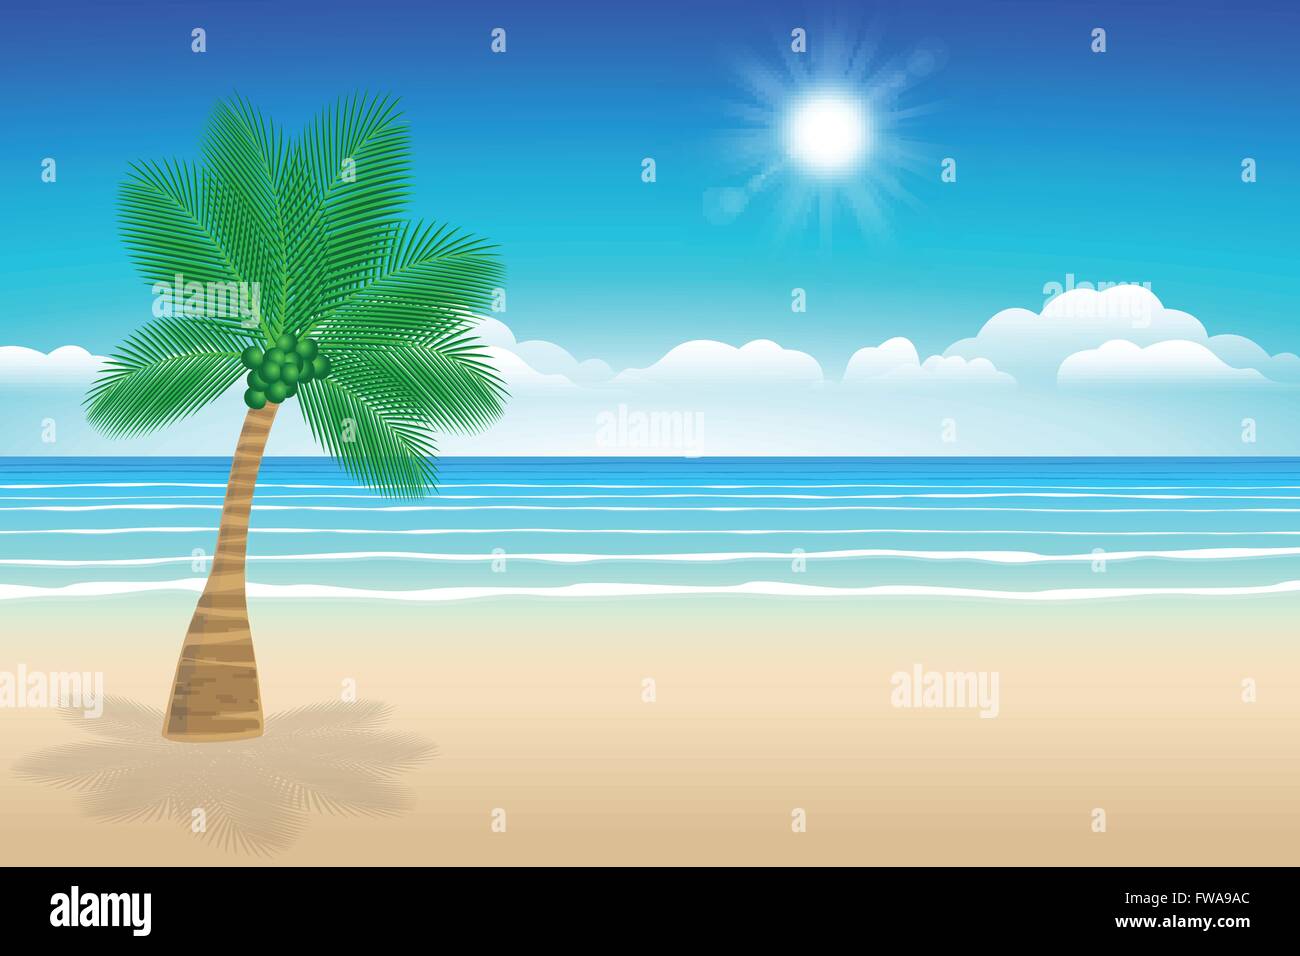 Background sea sand and coconut trees. Illustration summer. Stock Vector